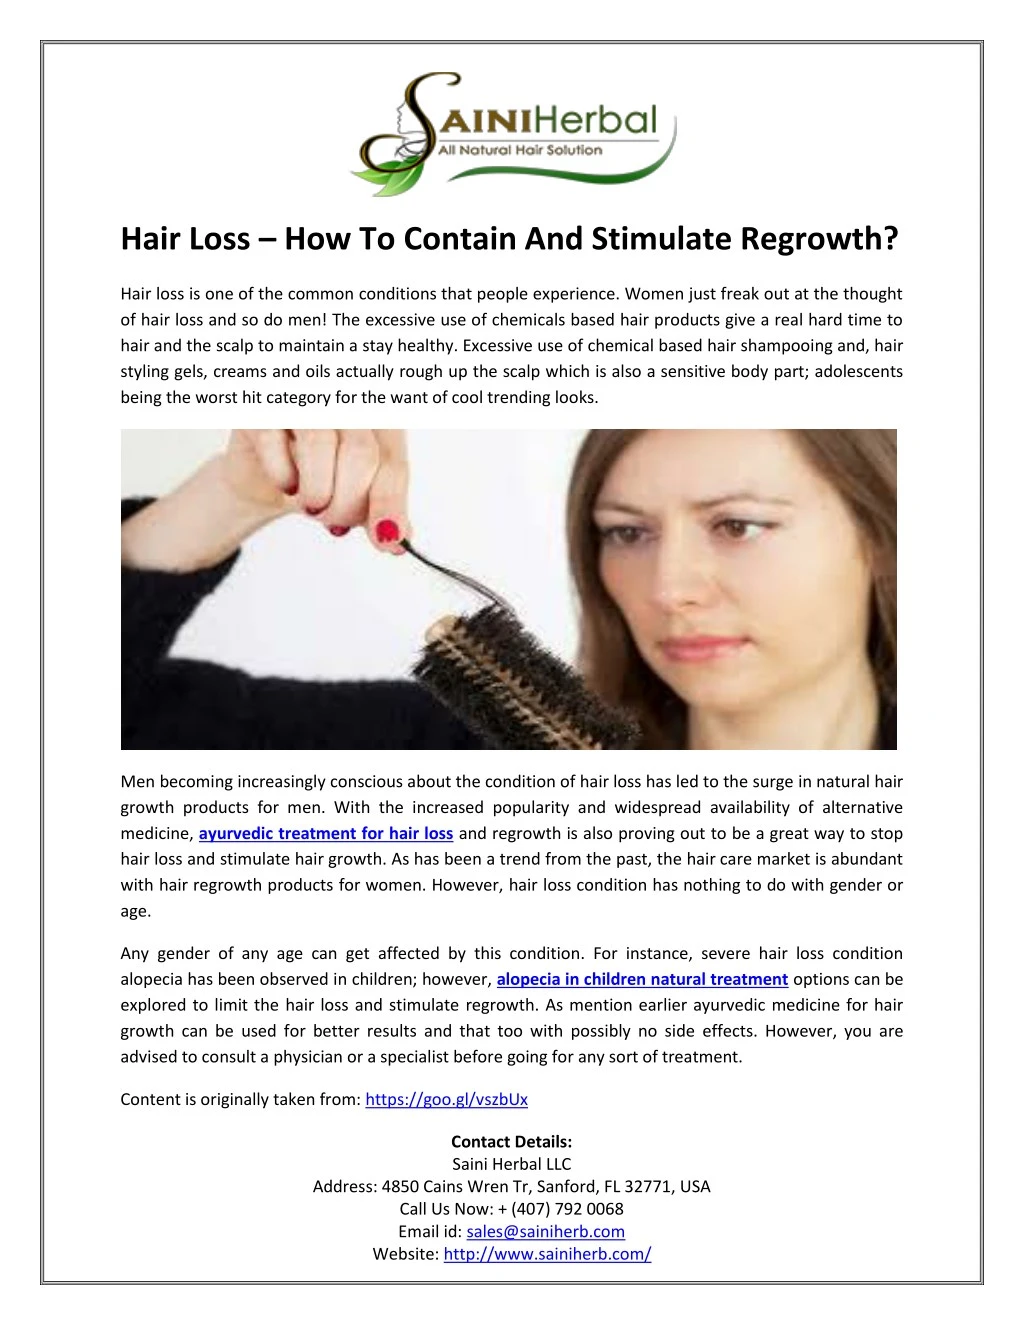 hair loss how to contain and stimulate regrowth